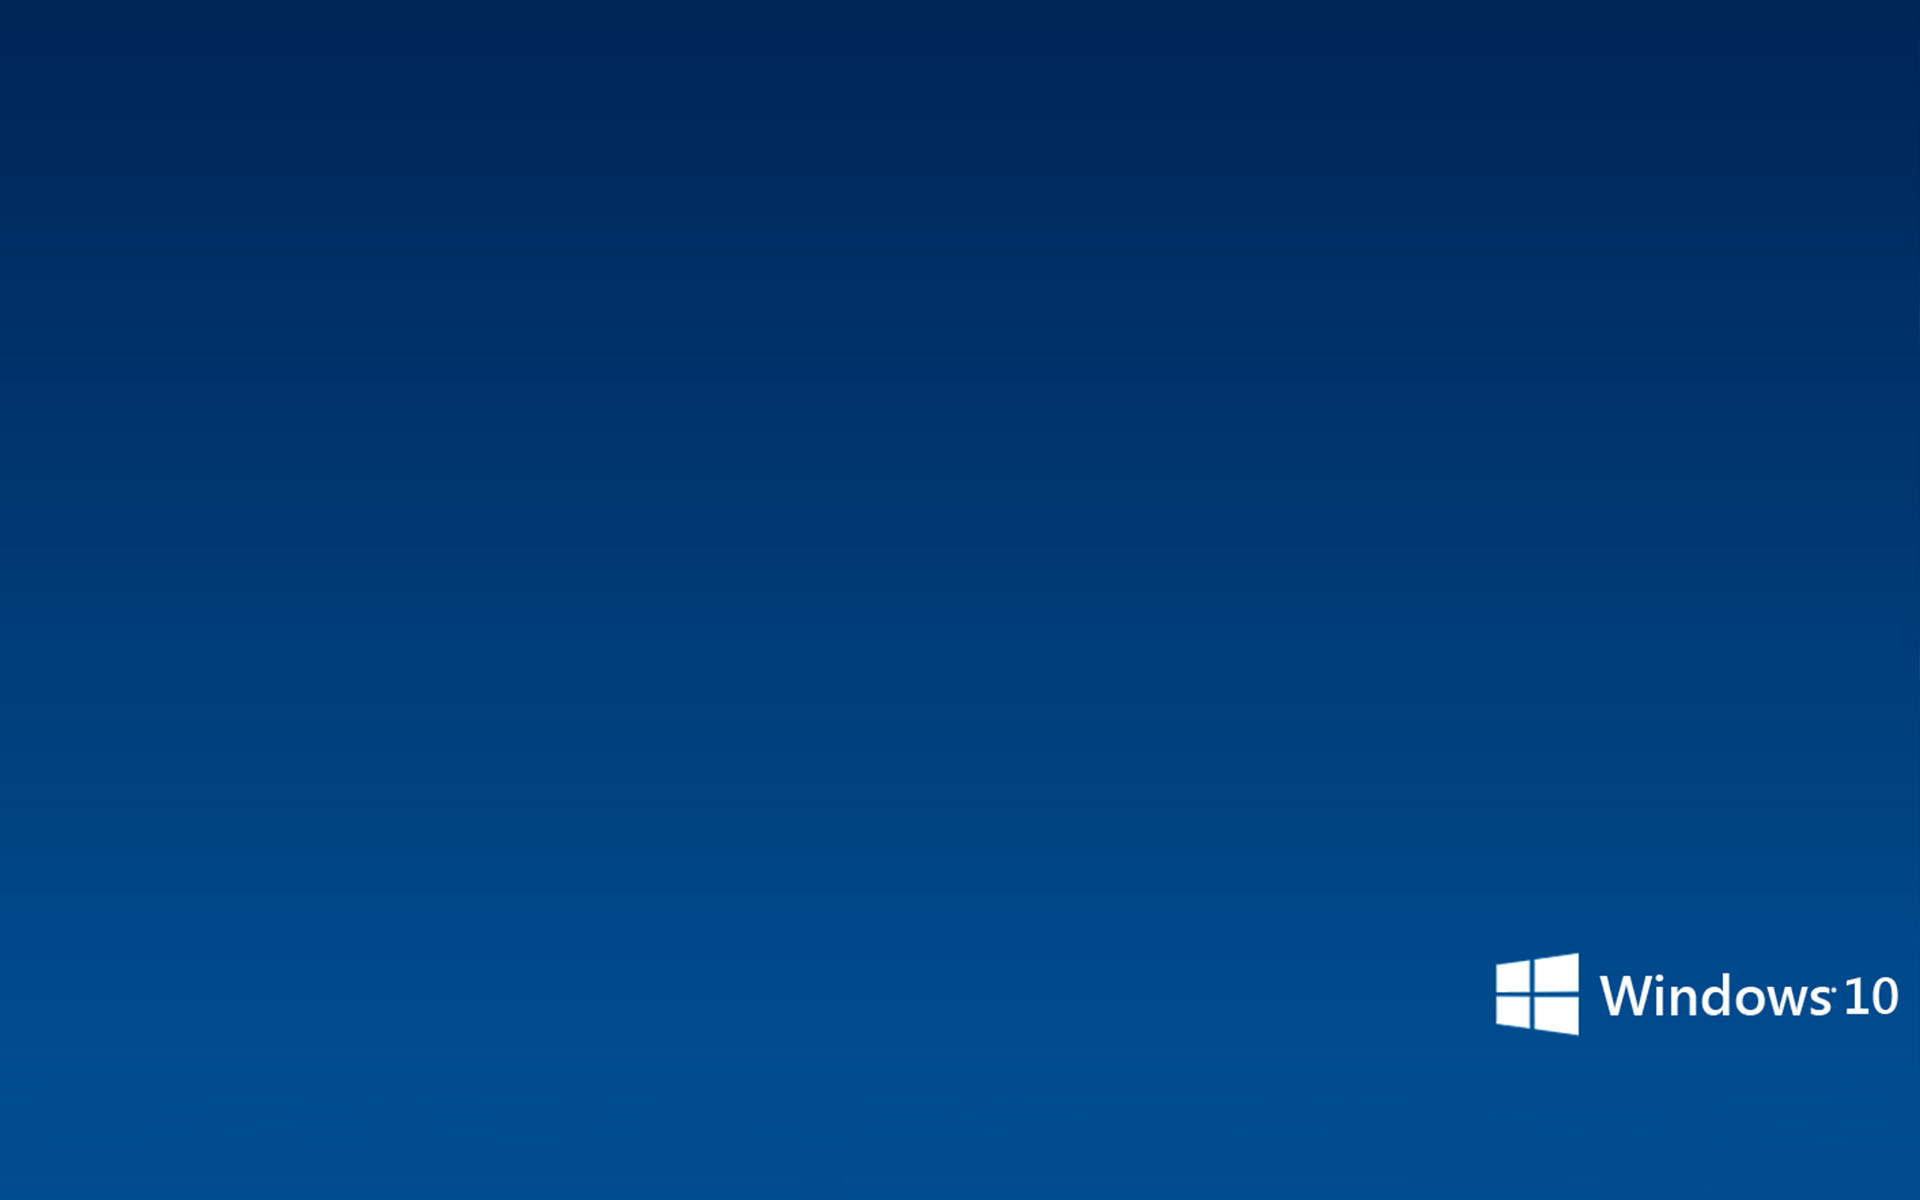 Free Download Simple Microsoft Windows 10 Wallpaper Wallpapers 19x10 For Your Desktop Mobile Tablet Explore 43 Wallpaper For Windows 10 Wallpapers For Desktop Best Wallpapers For Windows 10 3d Wallpapers For Windows 10